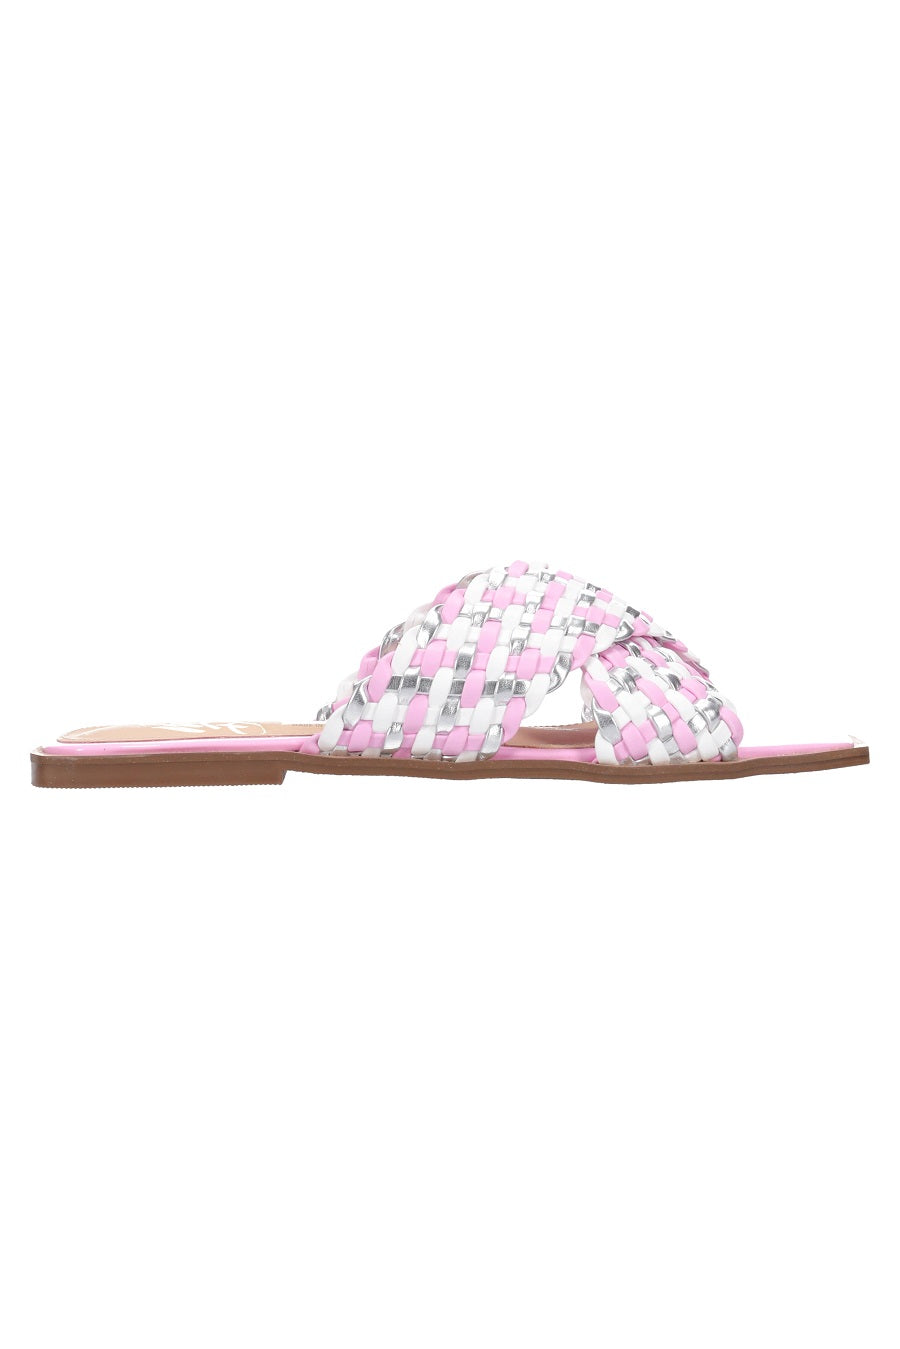 HEY MON Briony Pink/Wh Slide